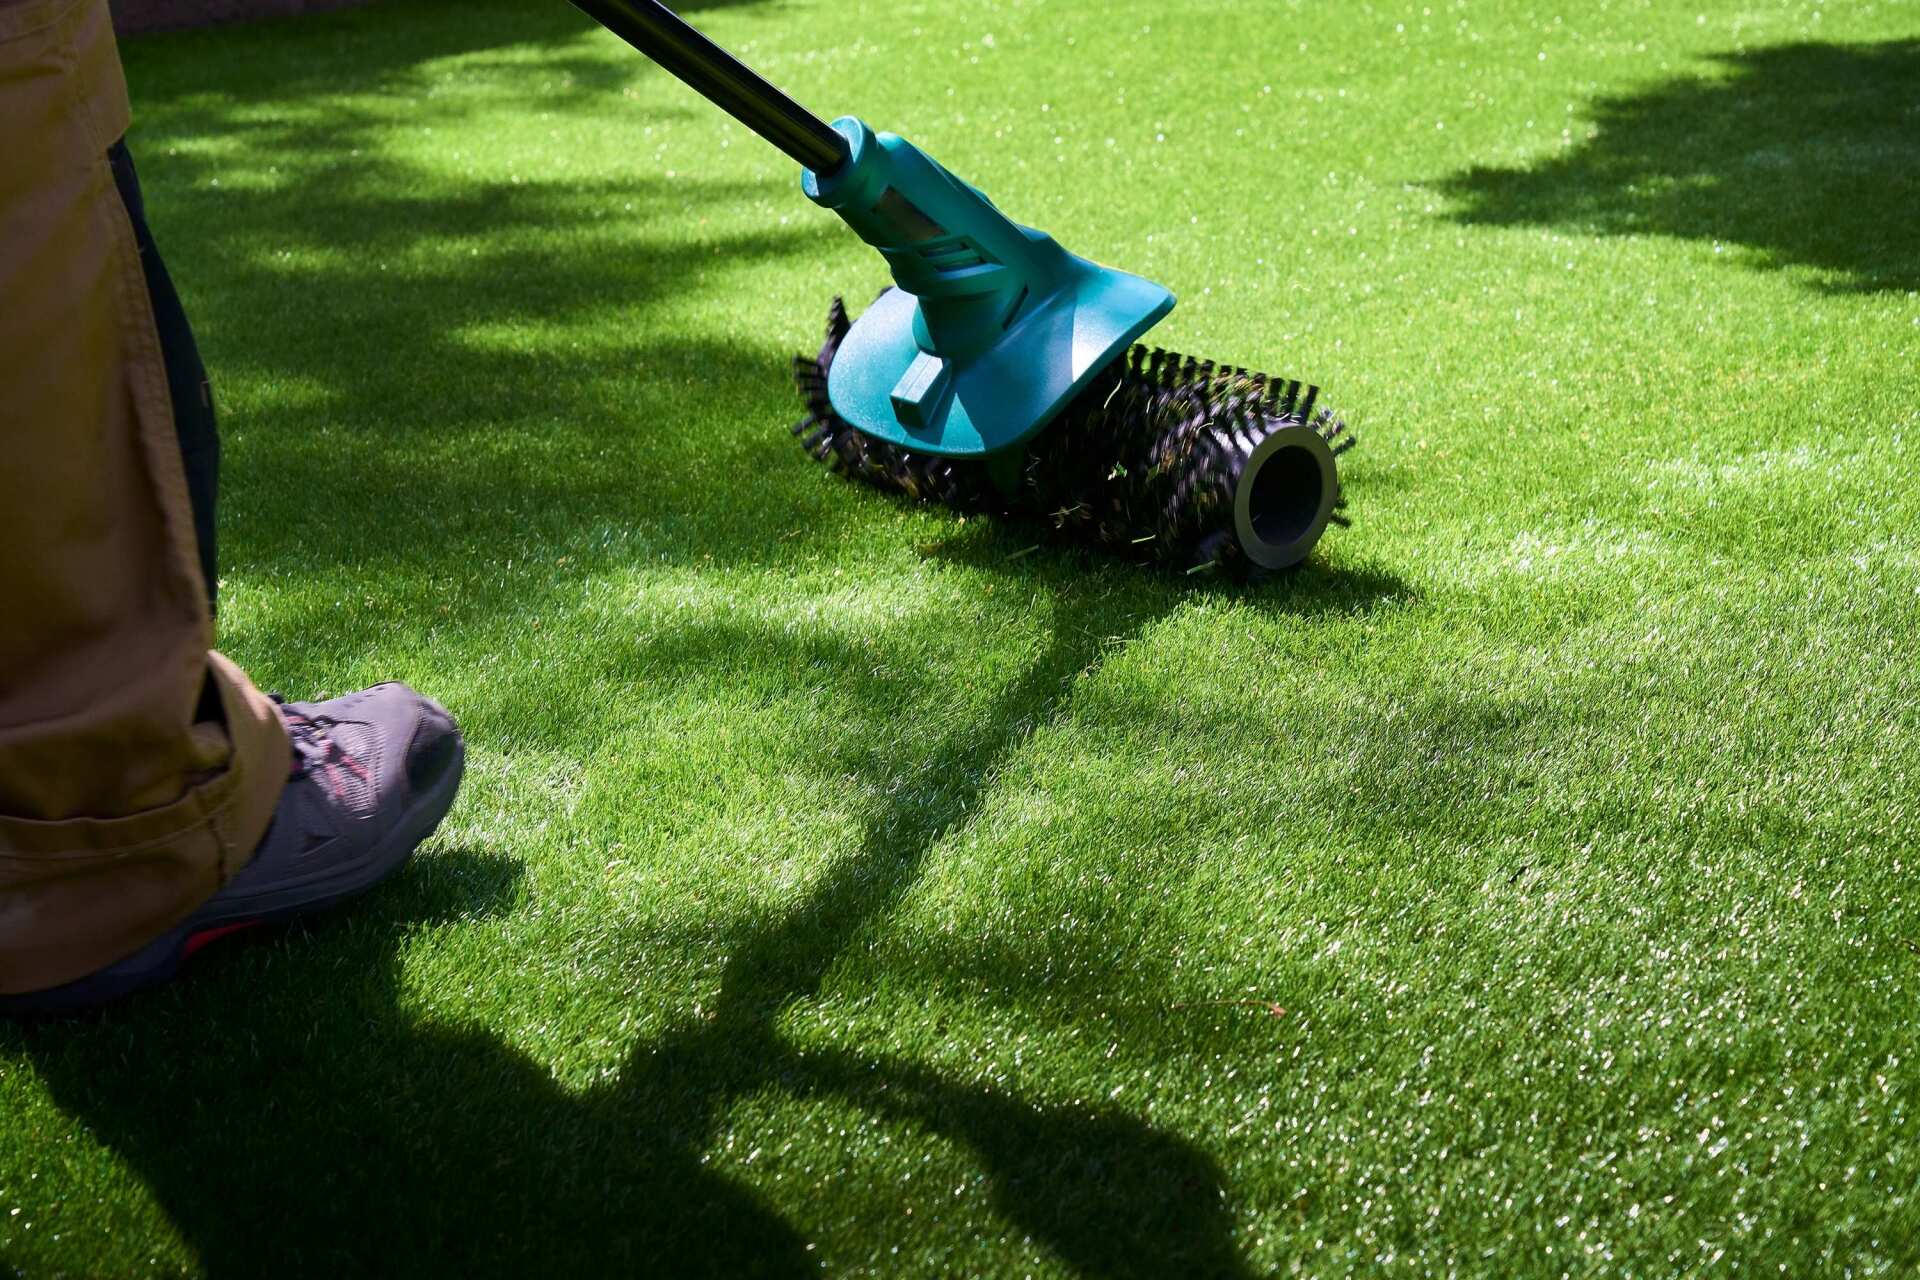 electric brush is used for periodic artificial grass cleaning and maintenance